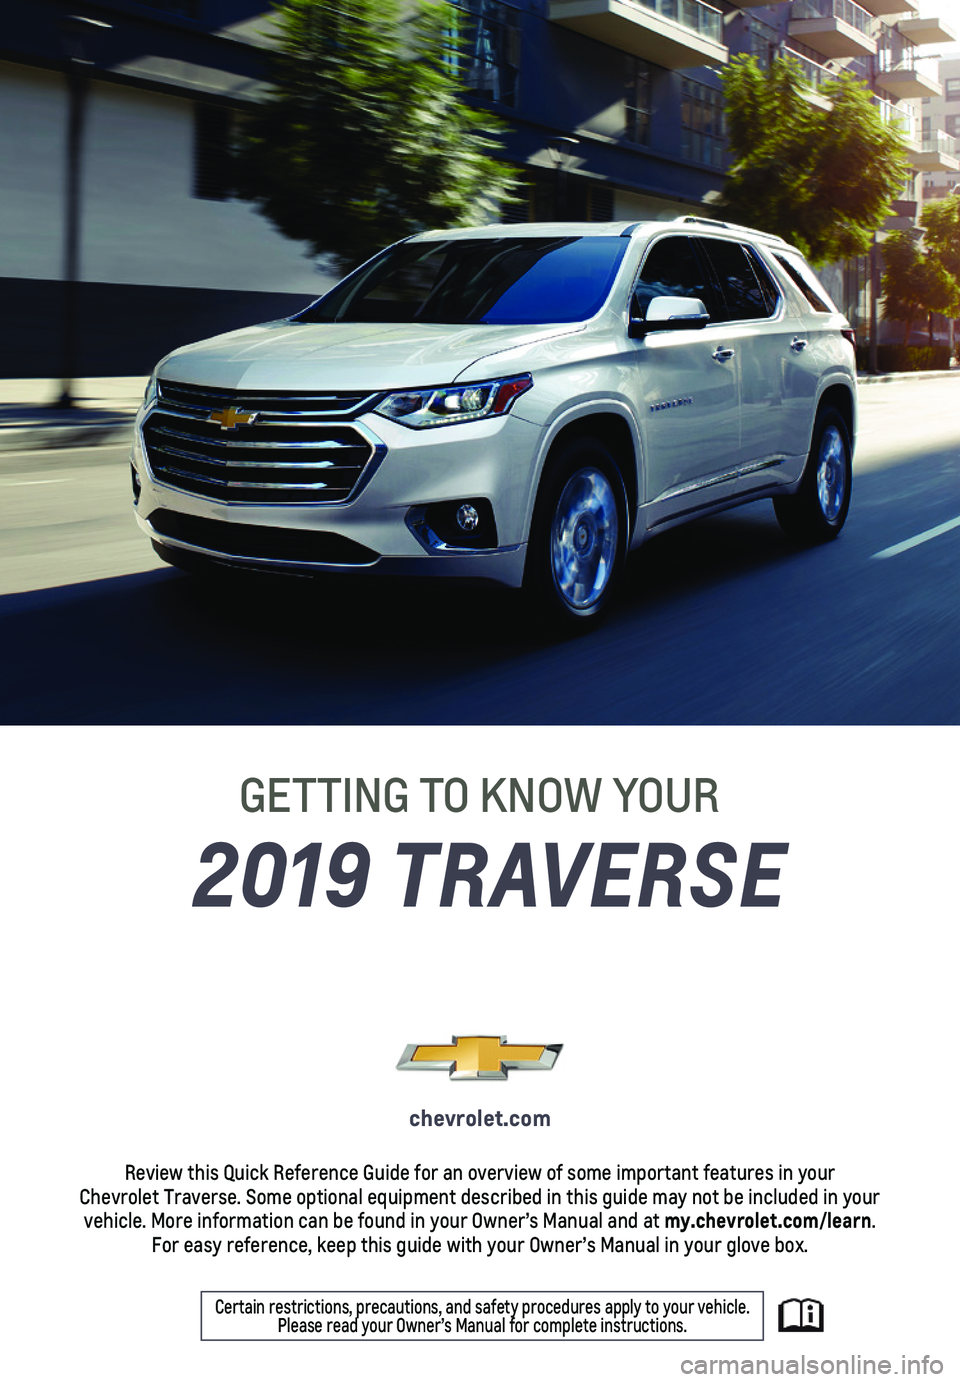 CHEVROLET TRAVERSE 2019  Get To Know Guide 1
2019 TRAVERSE
GETTING TO KNOW YOUR
chevrolet.com
Review this Quick Reference Guide for an overview of some important feat\
ures in your  Chevrolet Traverse. Some optional equipment described in this